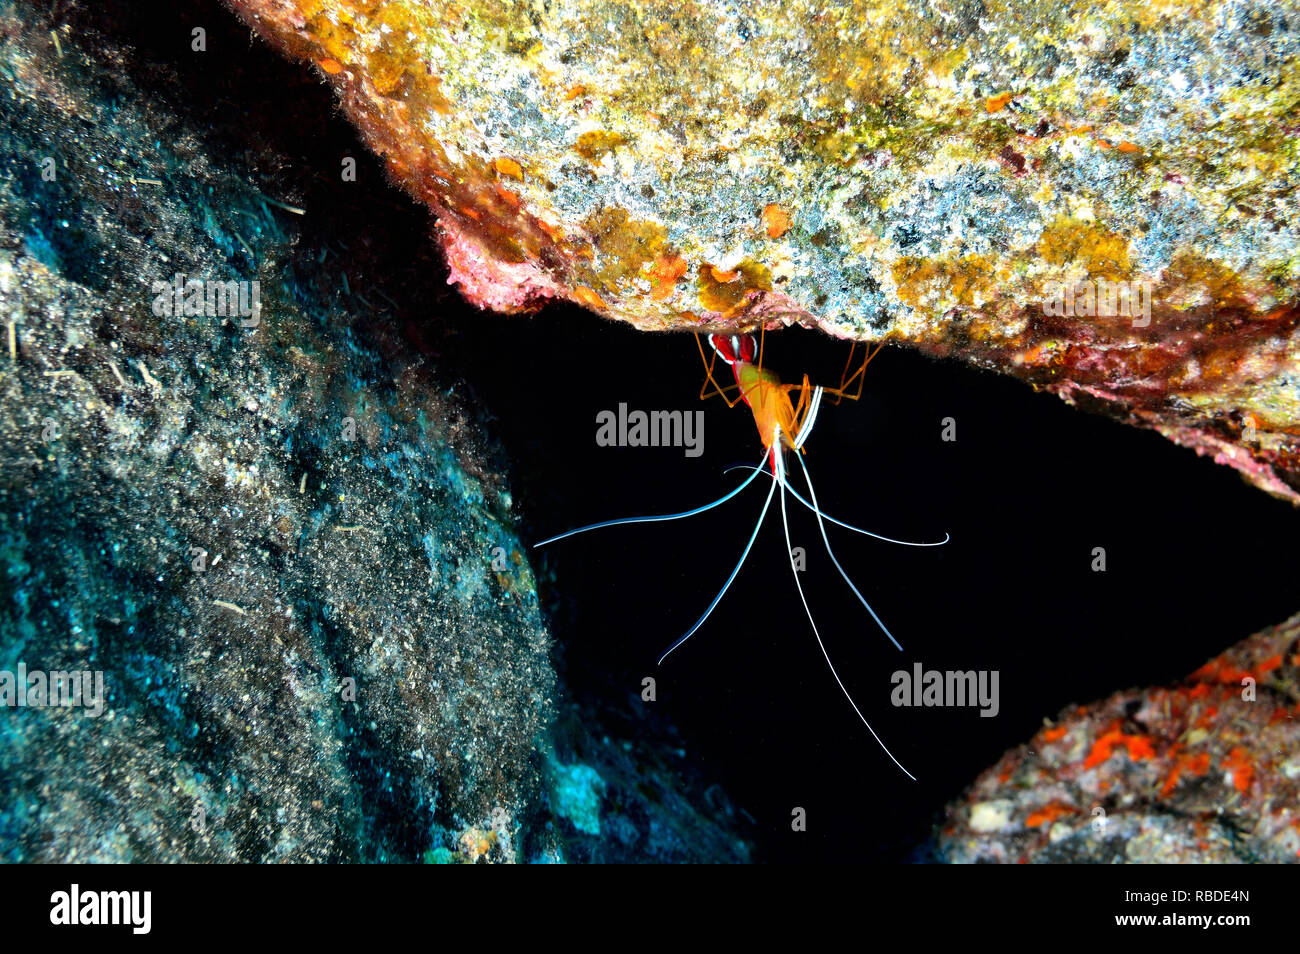 Cleaner Shrimp in Tenerife - Canary Islands Stock Photo